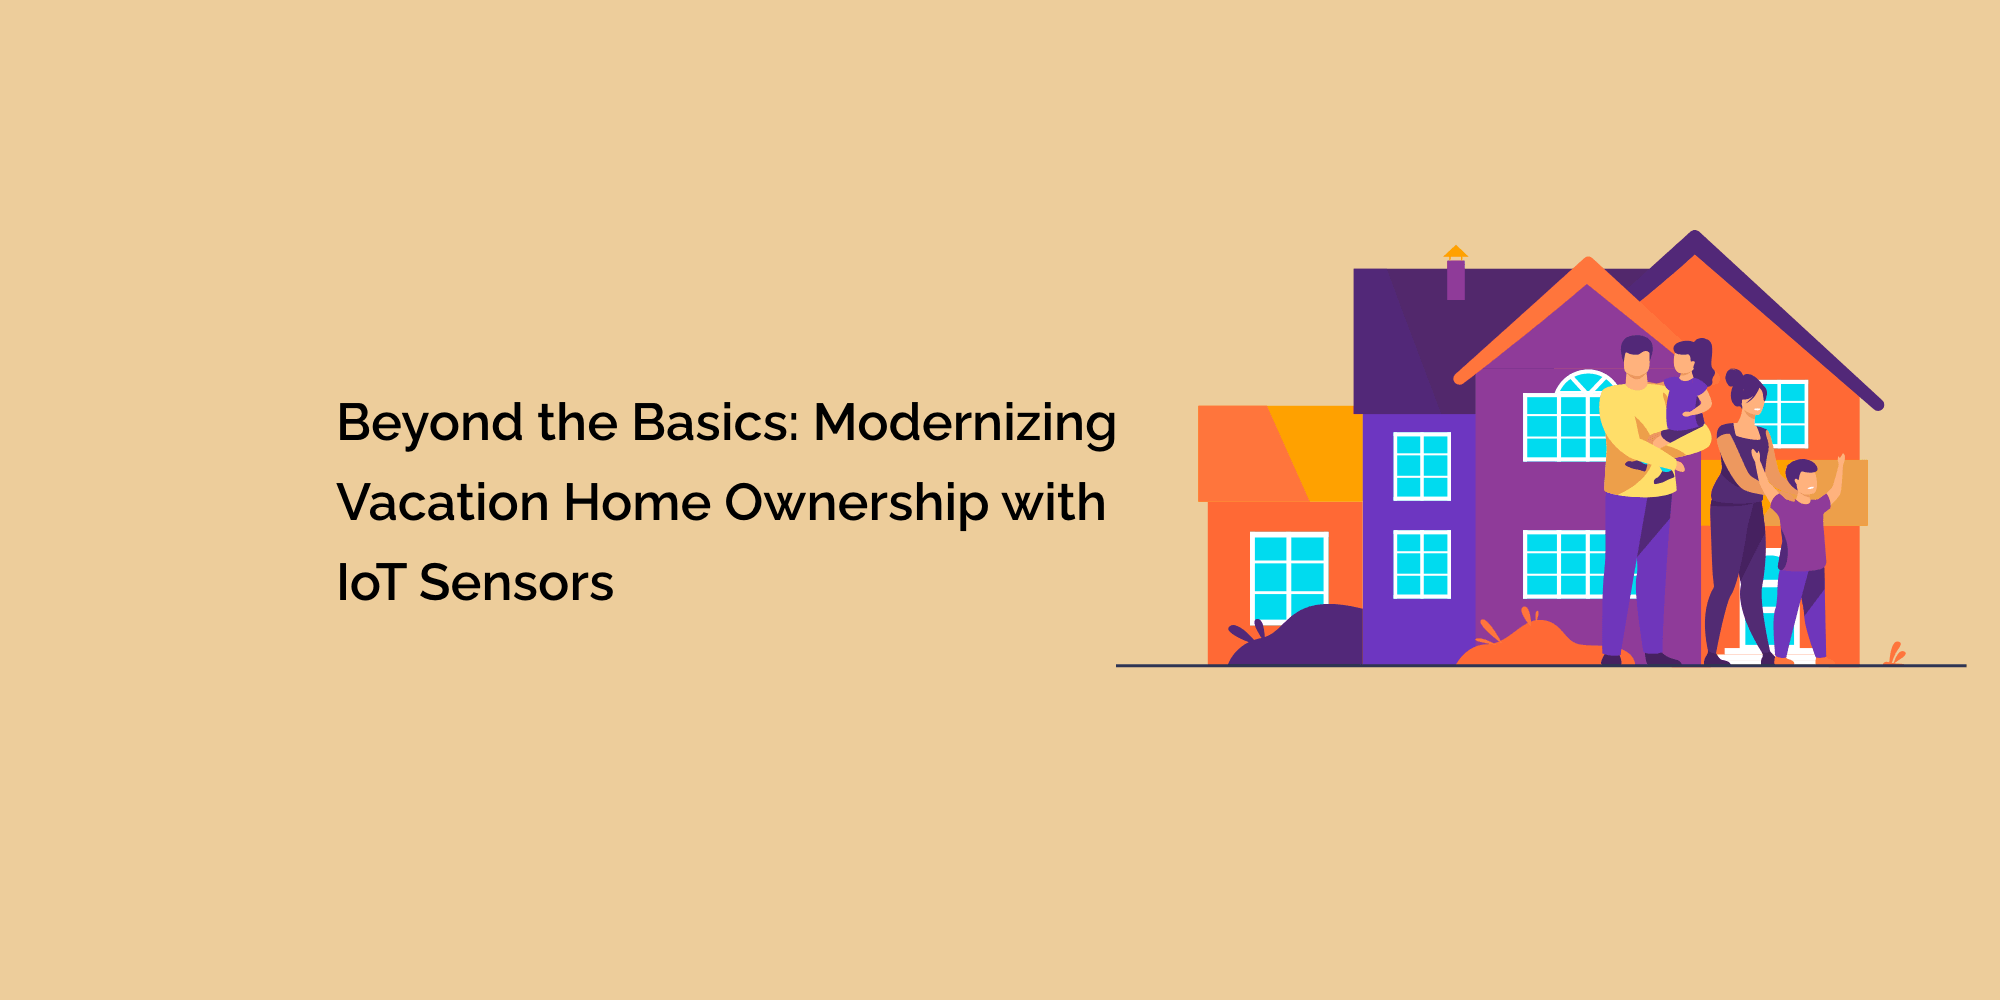 Beyond the Basics: Modernizing Vacation Home Ownership with IoT Sensors